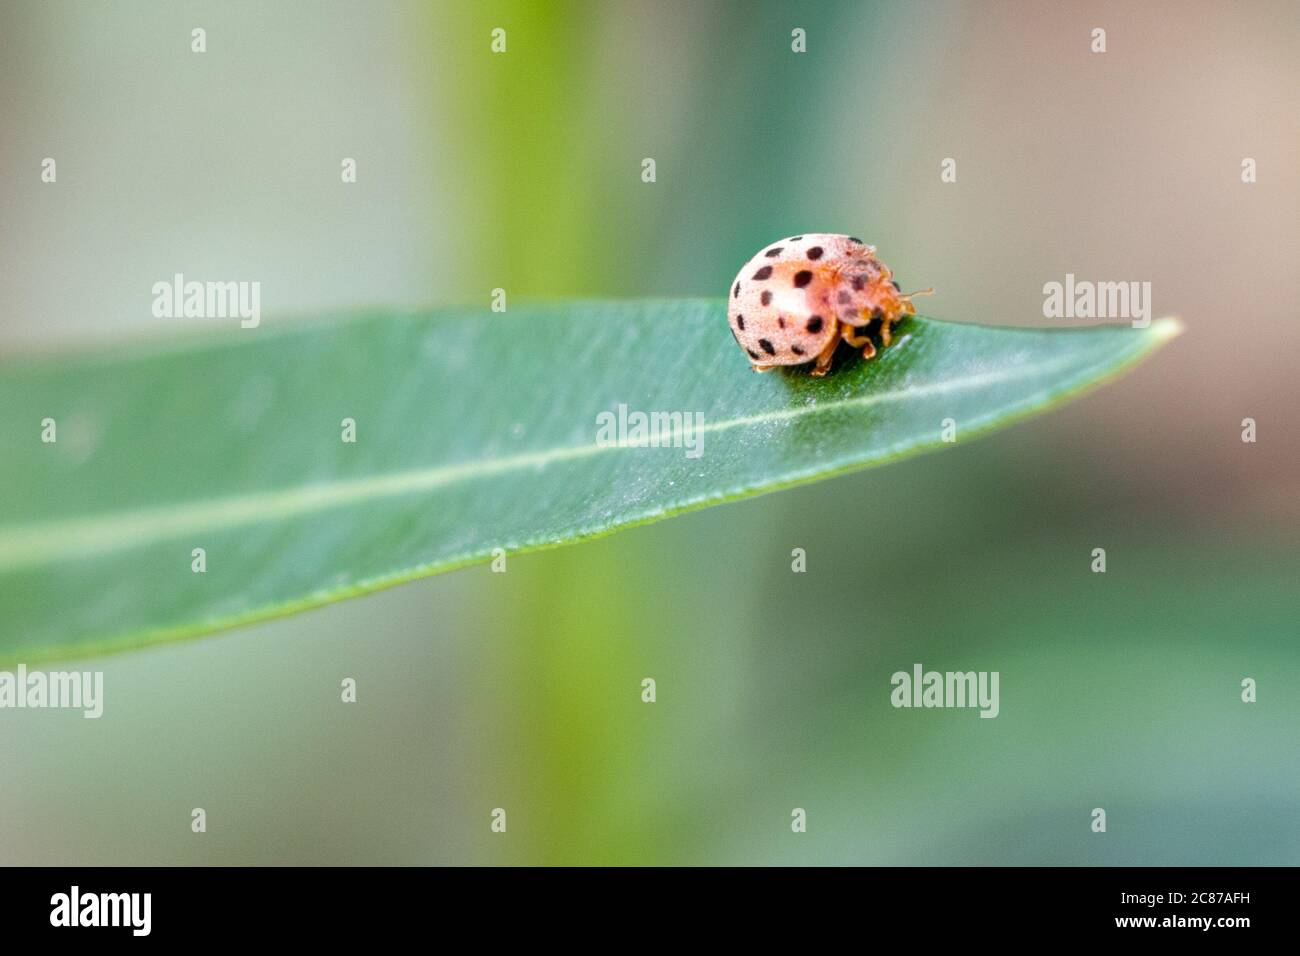 ladybird beetle insect on leaf over green blur background, selective focus Stock Photo